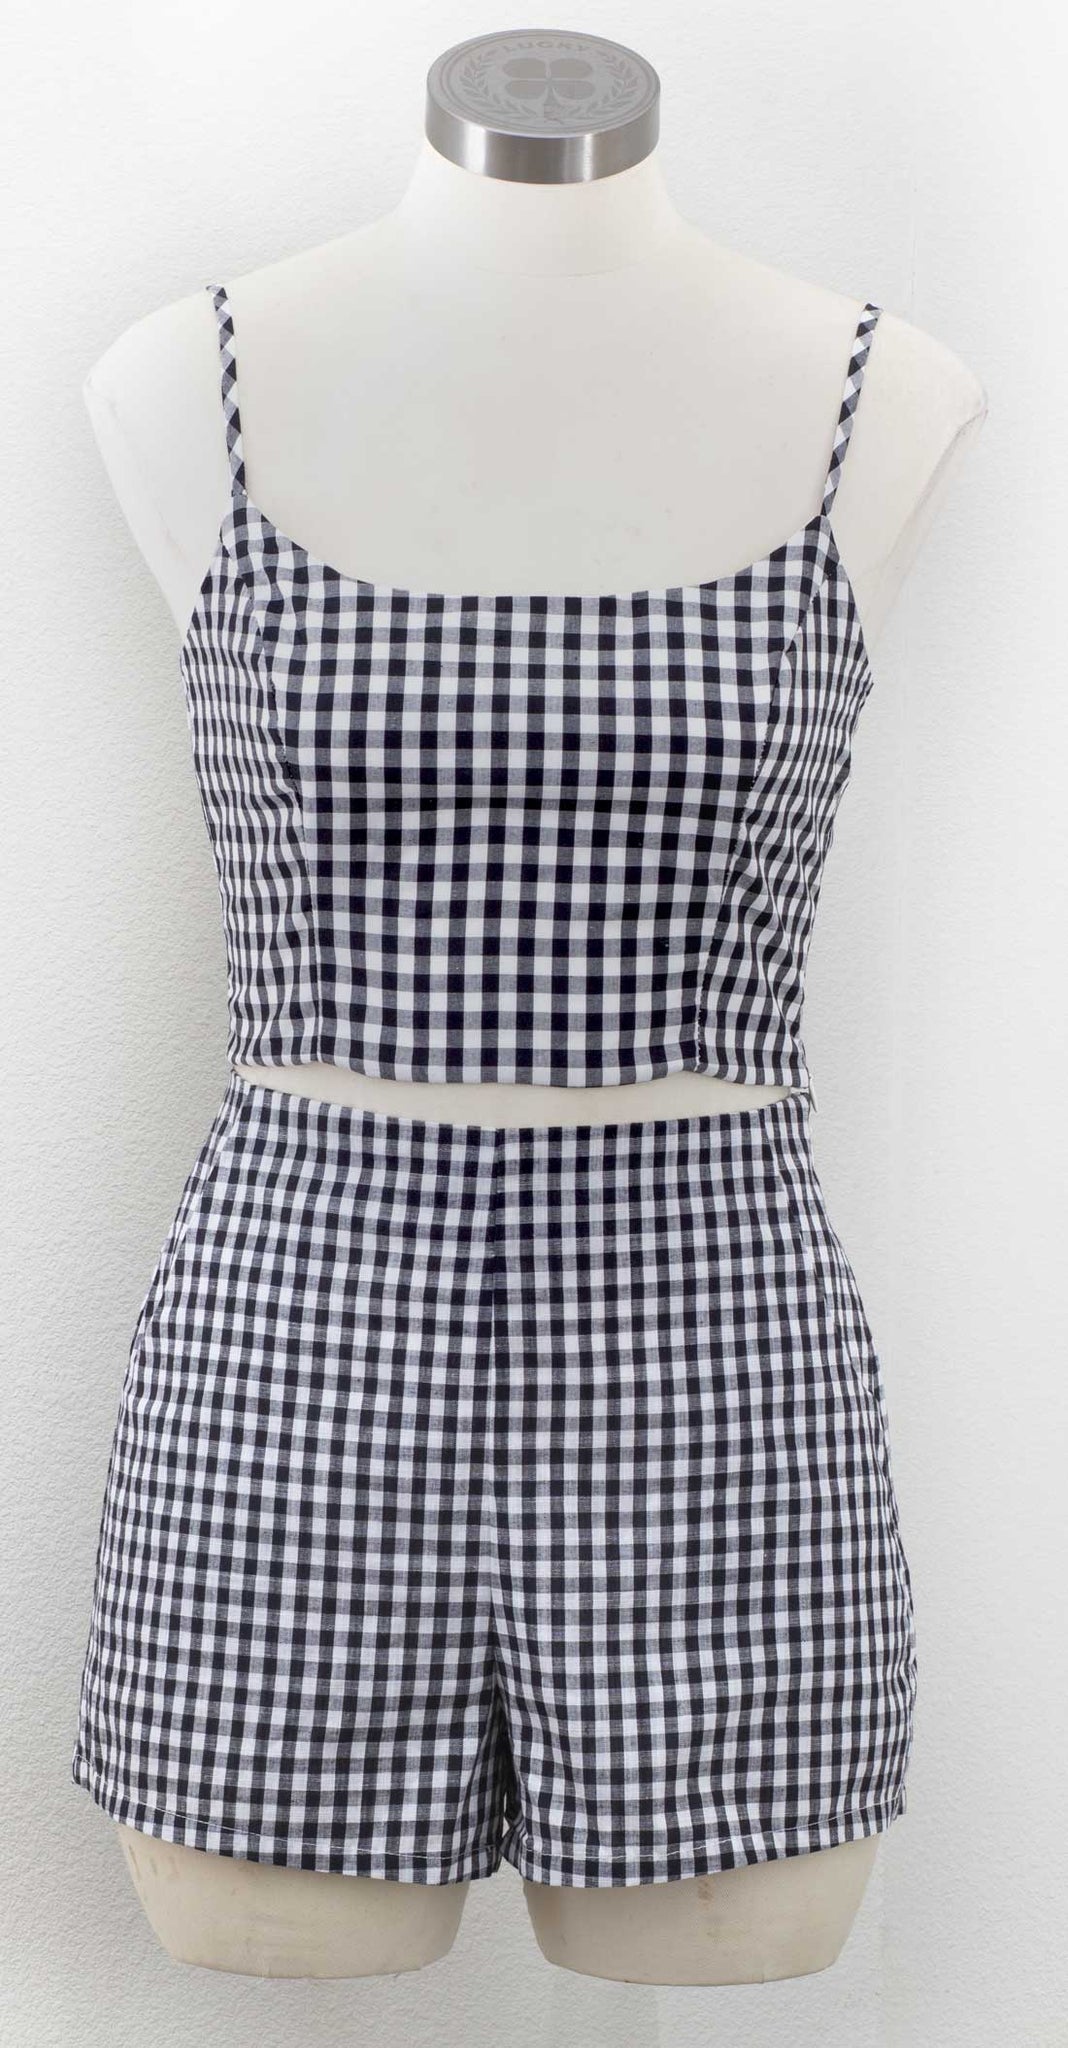 Retro Gal High Waist Gingham Shorts | Double Trouble Apparel